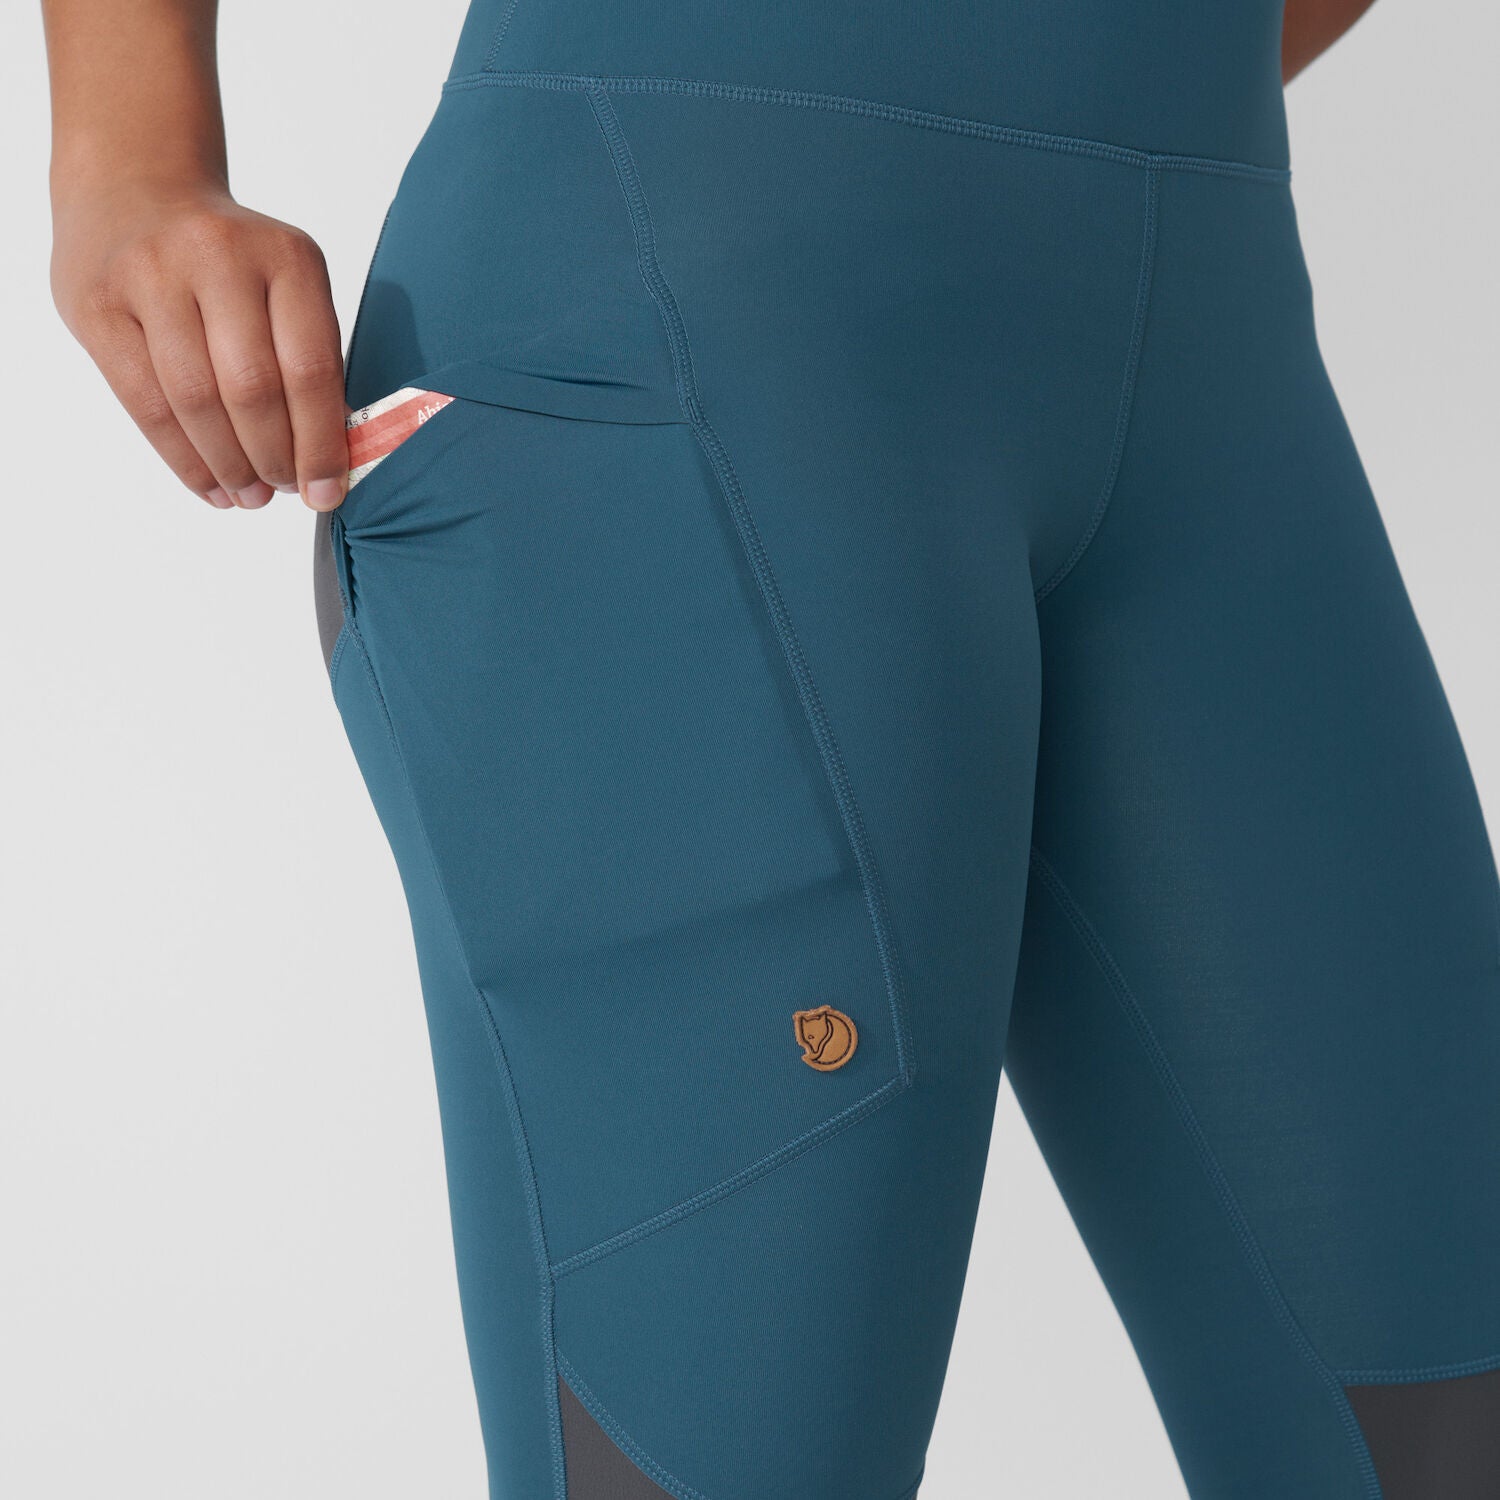 branded & durable blue slim fit women trousers with long pockets.